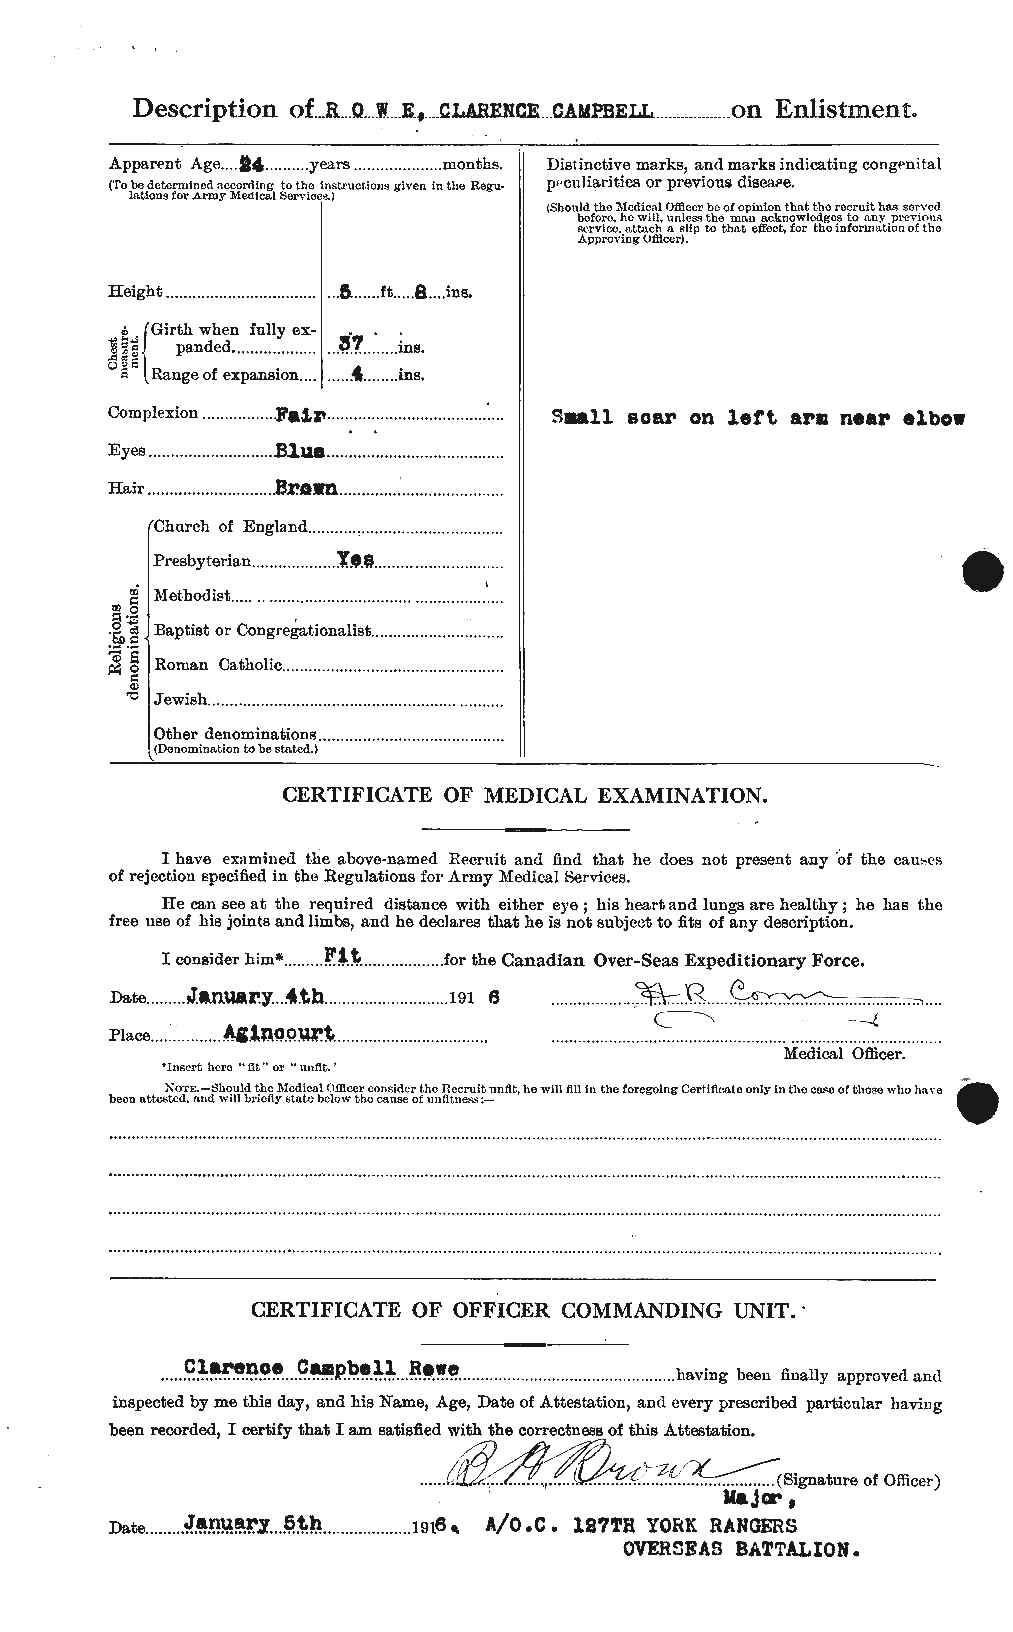 Personnel Records of the First World War - CEF 615822b